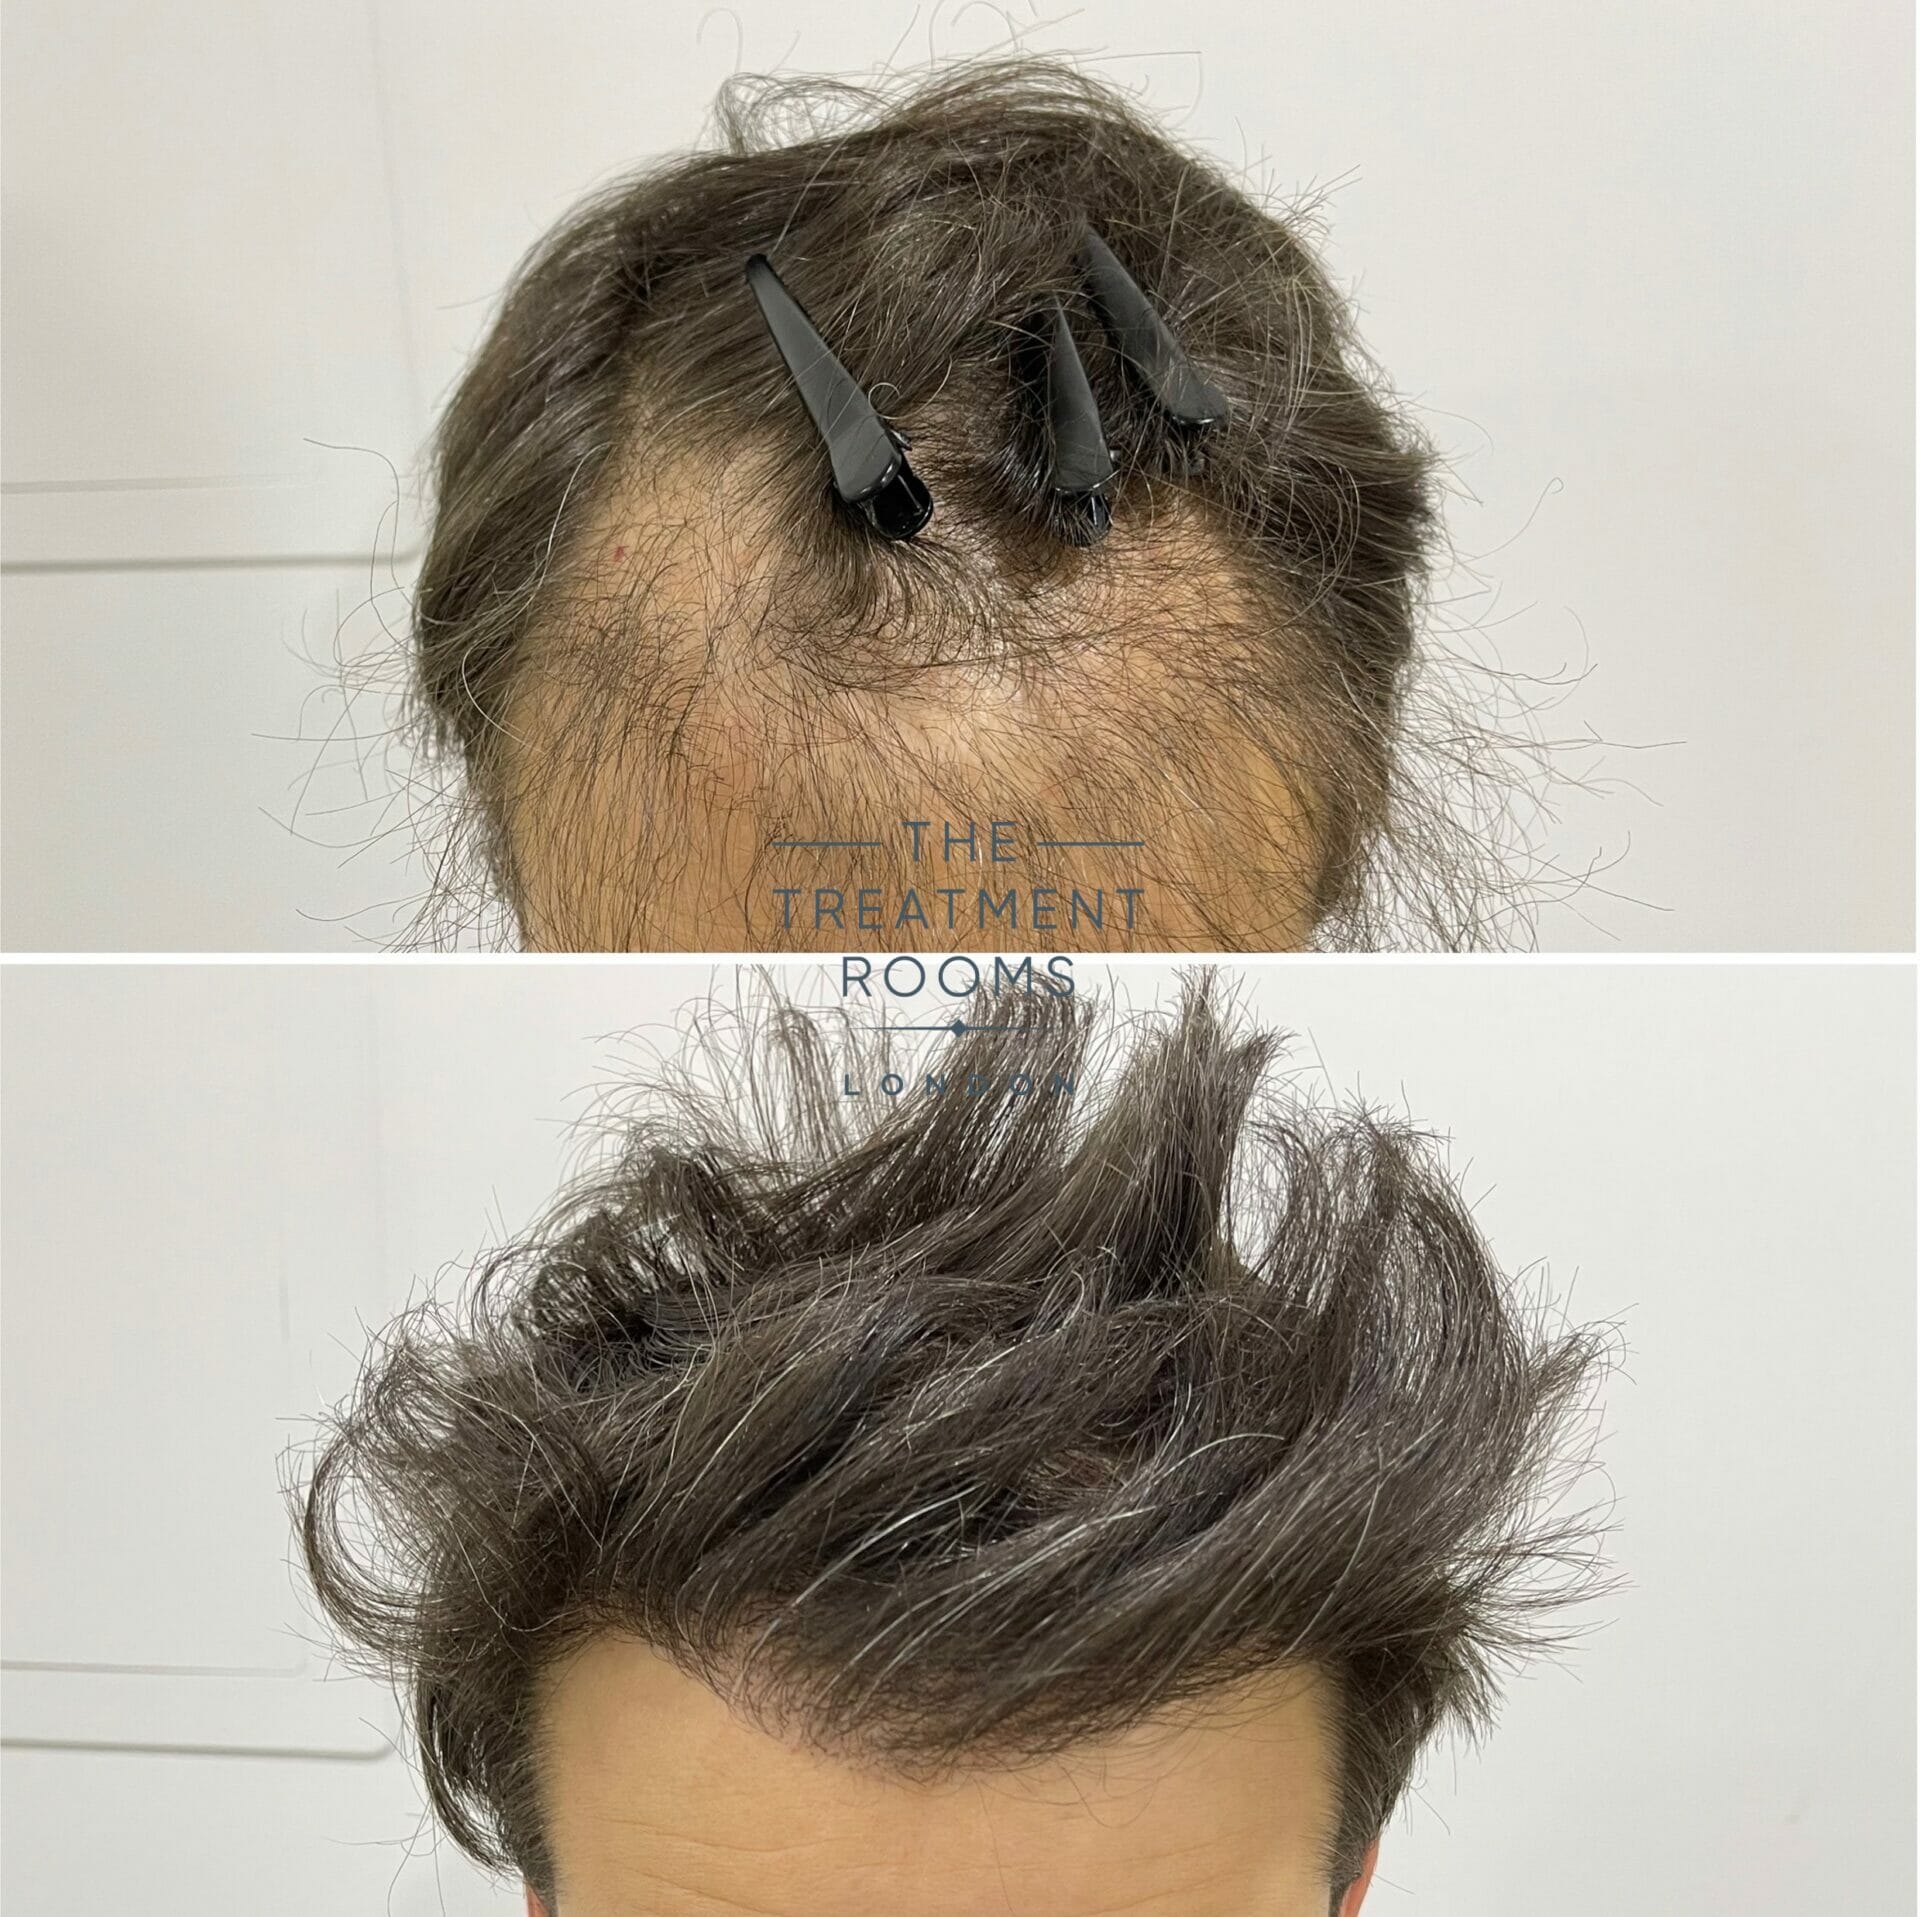 fue Hair transplant repair london before and after